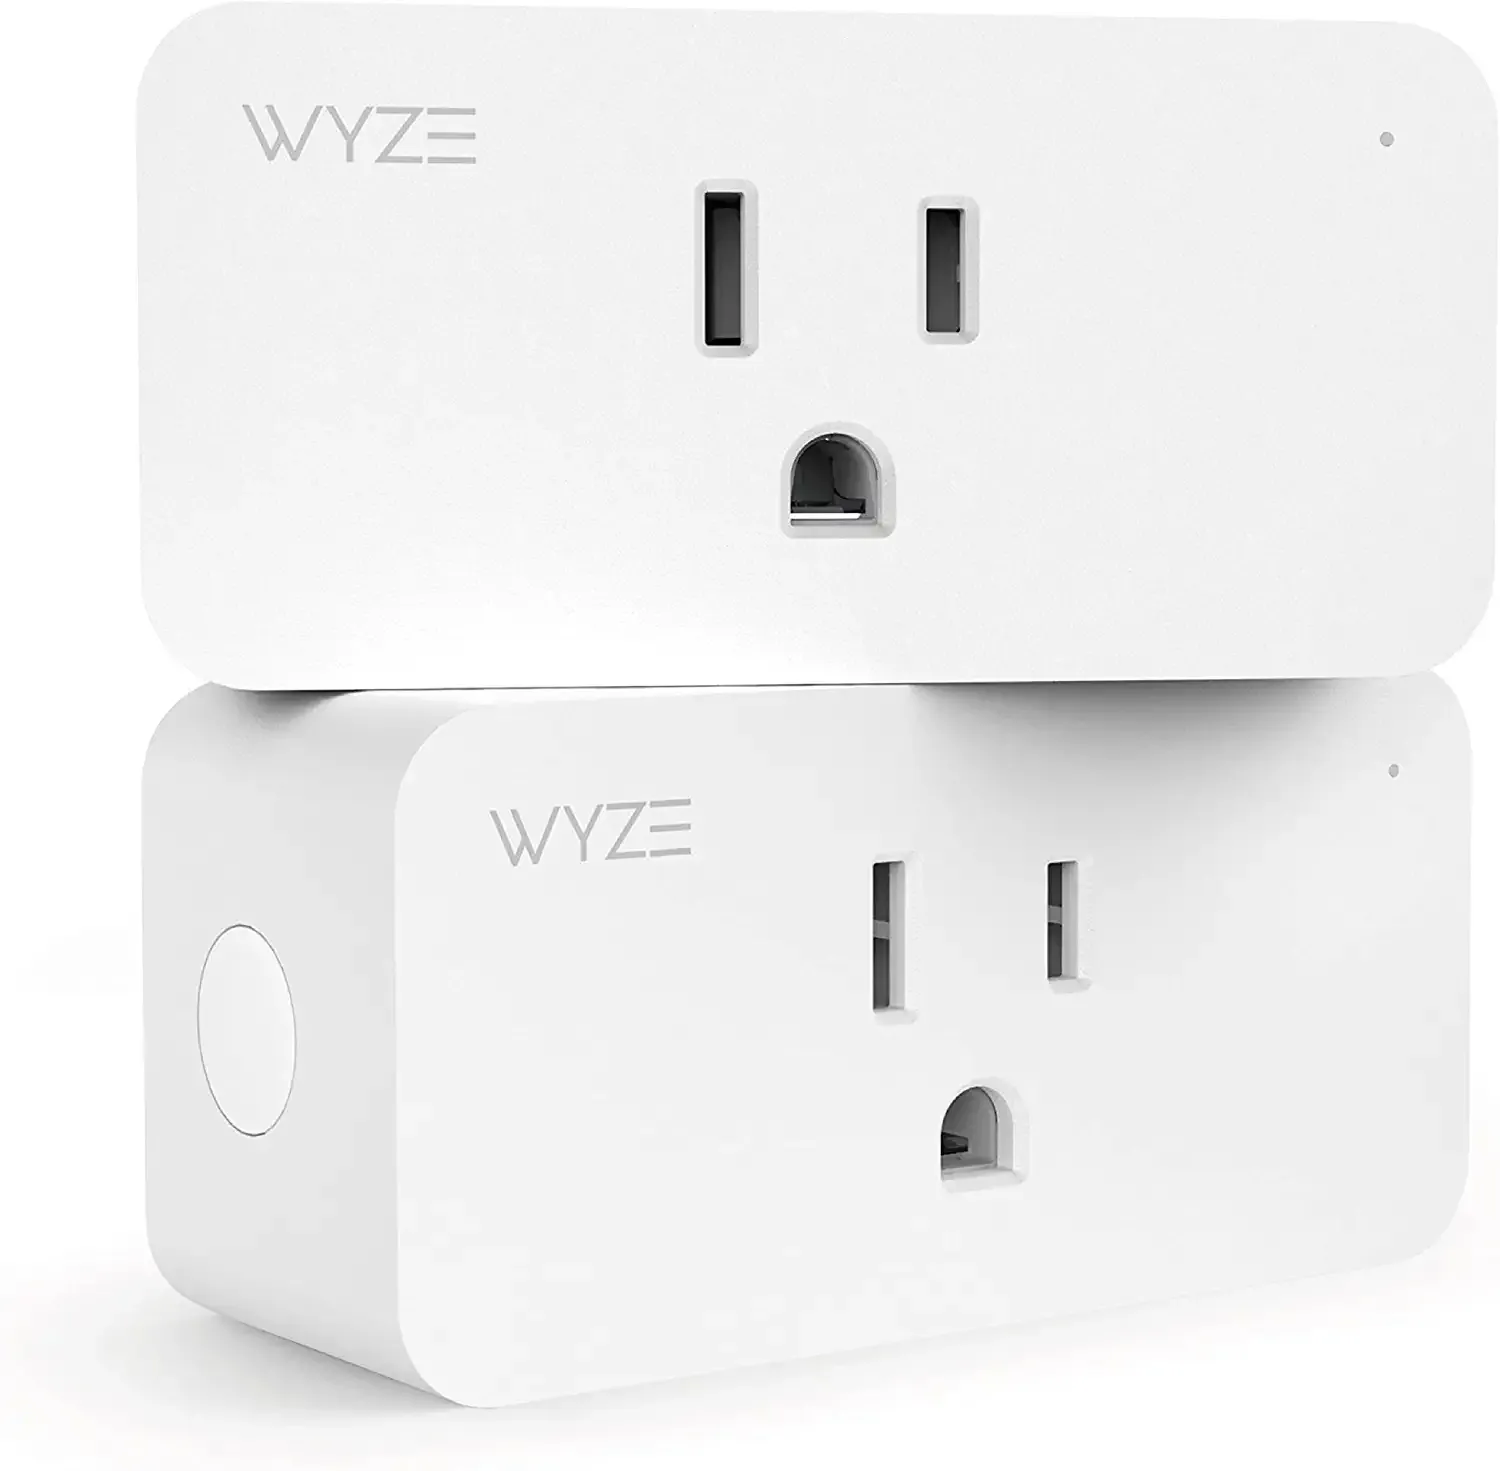 Wyze has made a name for itself with affordable smart home tech and these smart plugs are no exception. There's no hub required, instead relying on 2.4GHz Wi-Fi, with Google Assistant connectivity. The companion app also has useful features like vacation mode and grouping. 